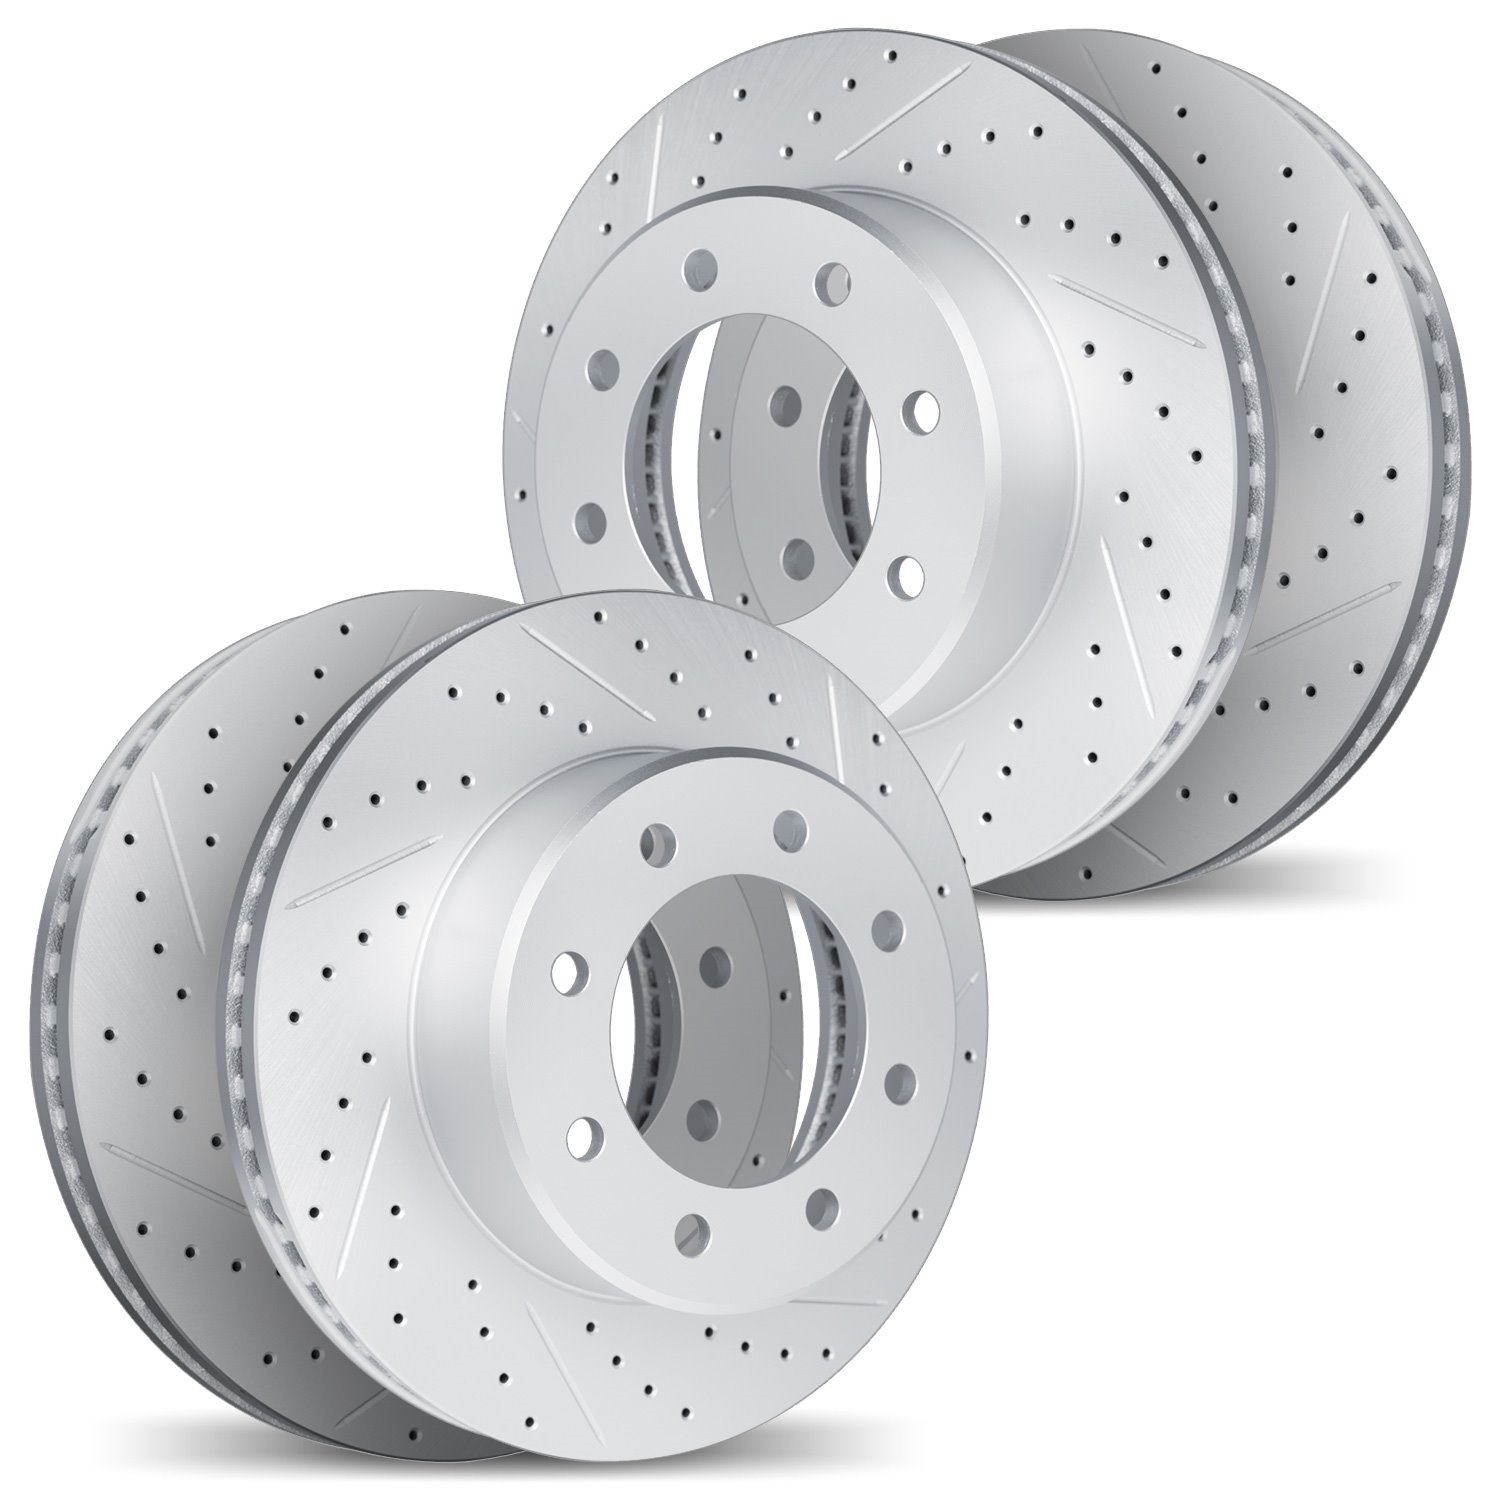 2004-48044 Geoperformance Drilled/Slotted Brake Rotors, 2001-2010 GM, Position: Front and Rear